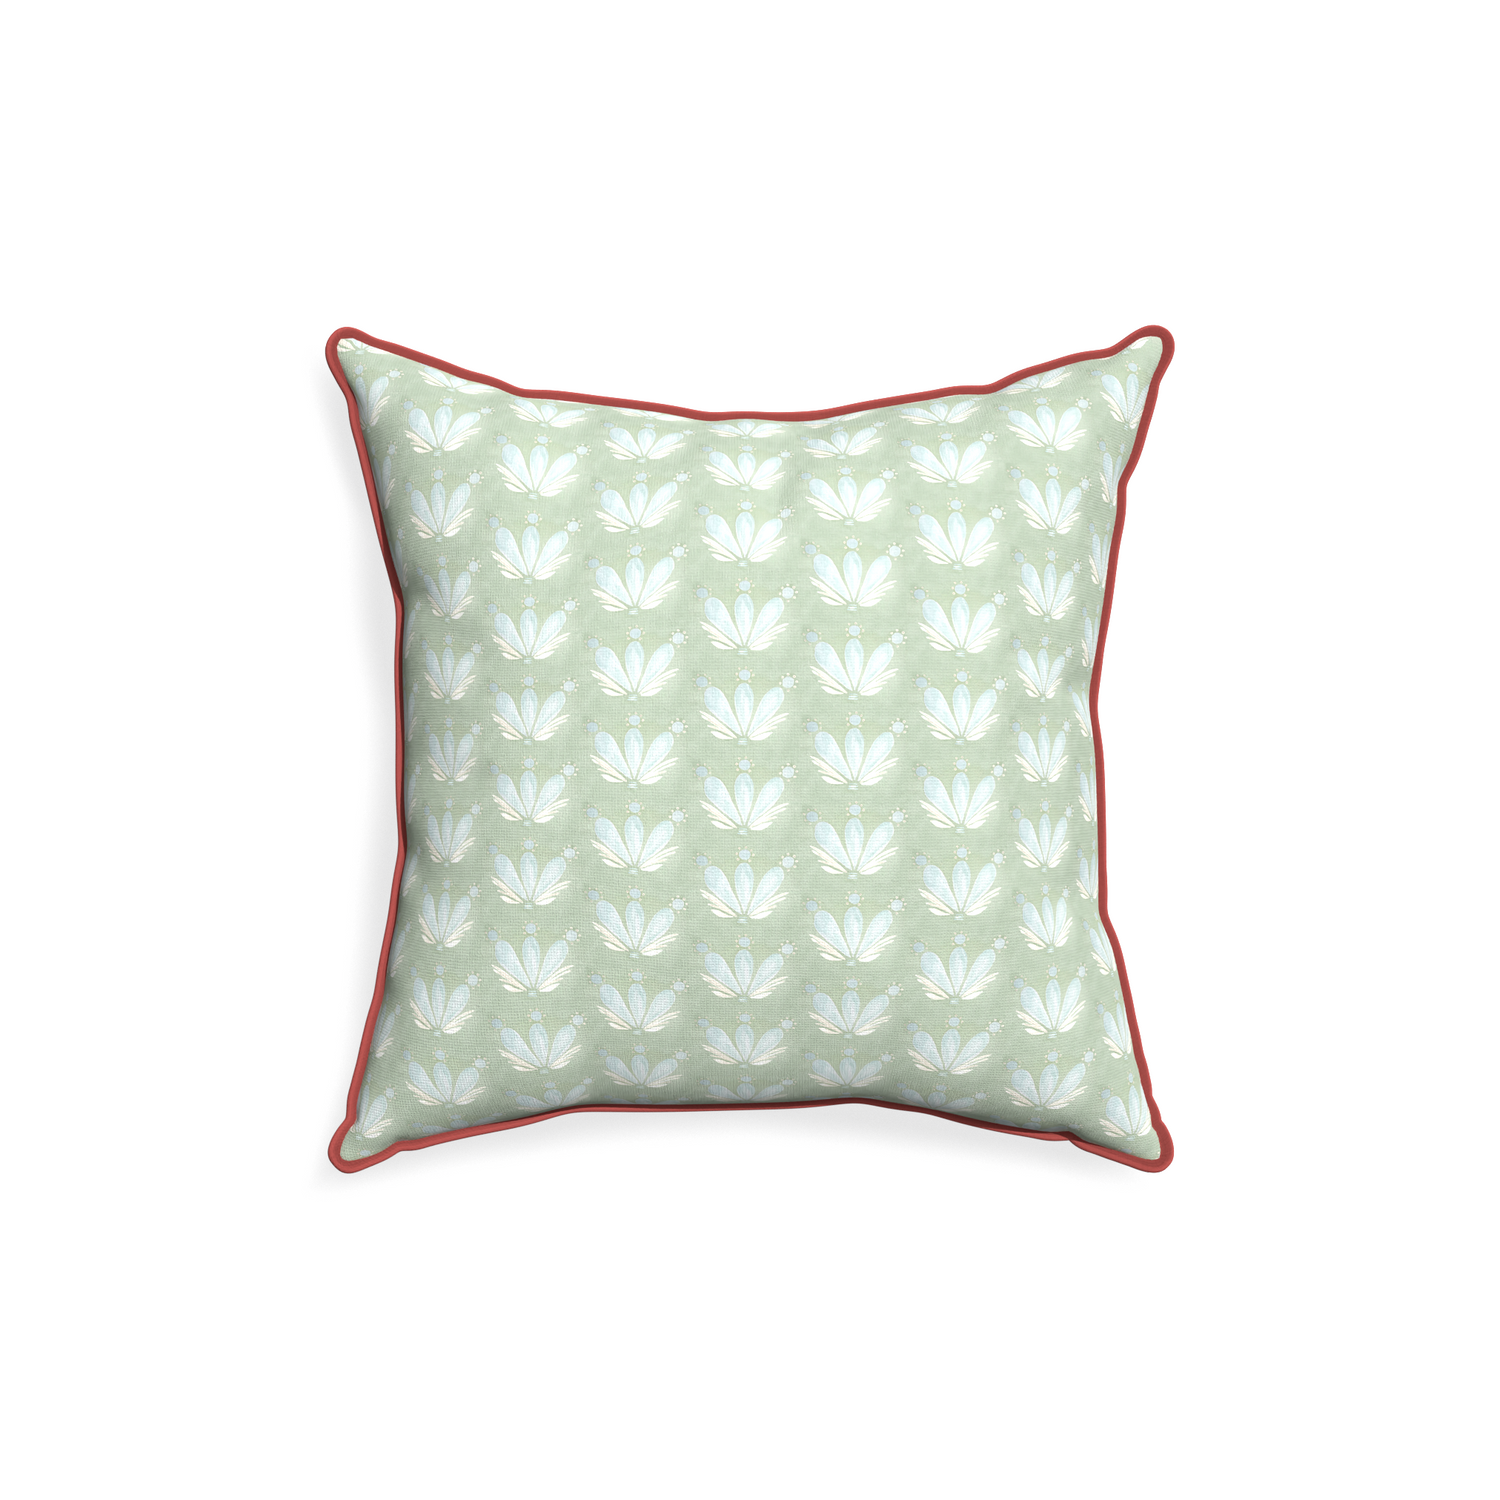 18-square serena sea salt custom pillow with c piping on white background